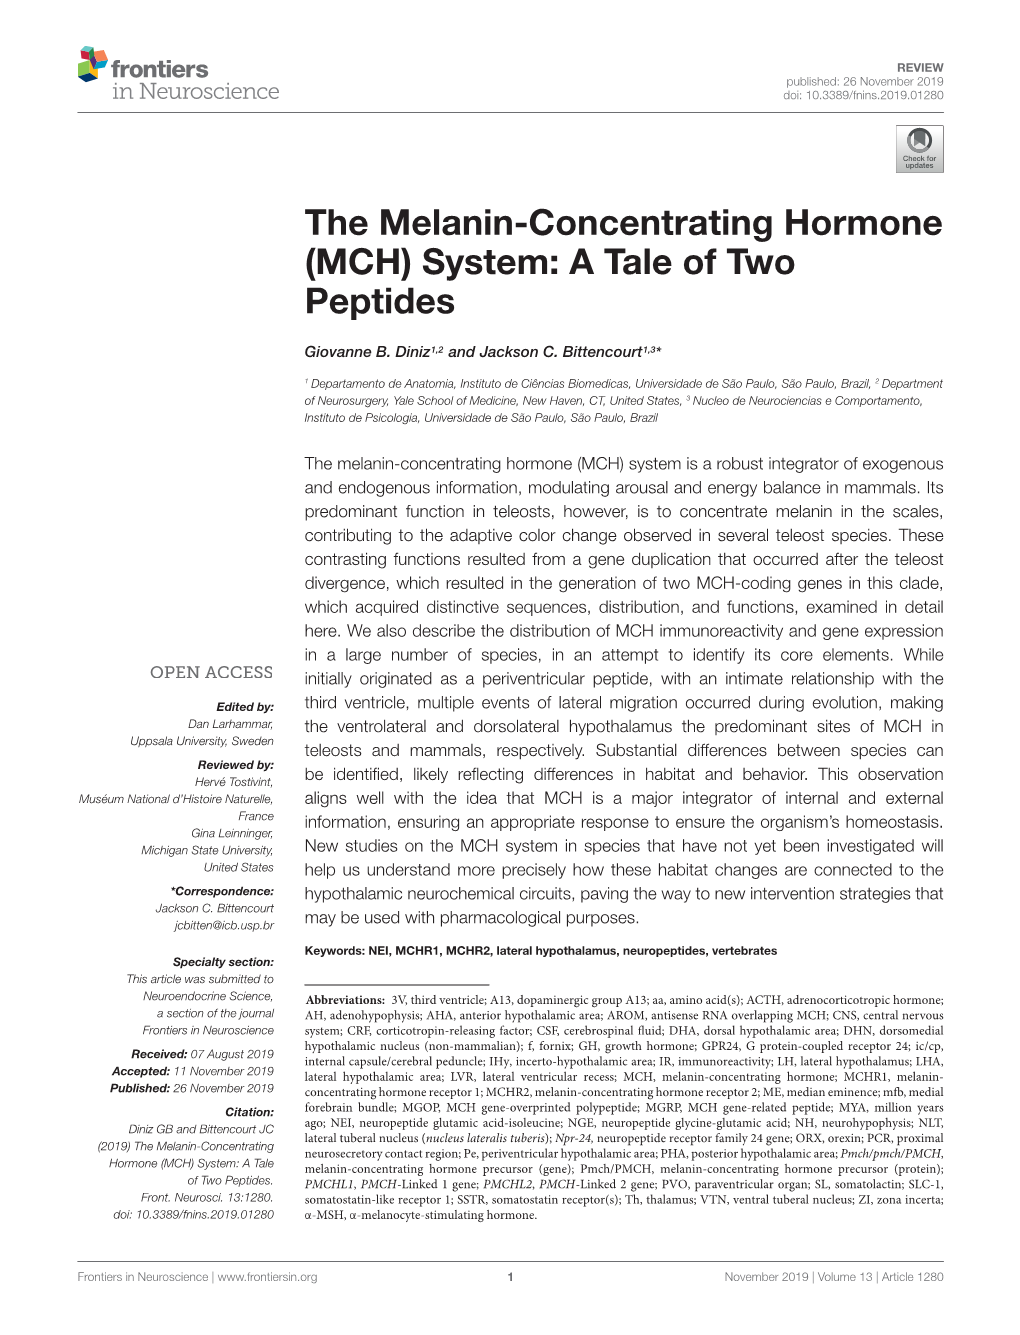 The Melanin-Concentrating Hormone (MCH) System: a Tale of Two Peptides